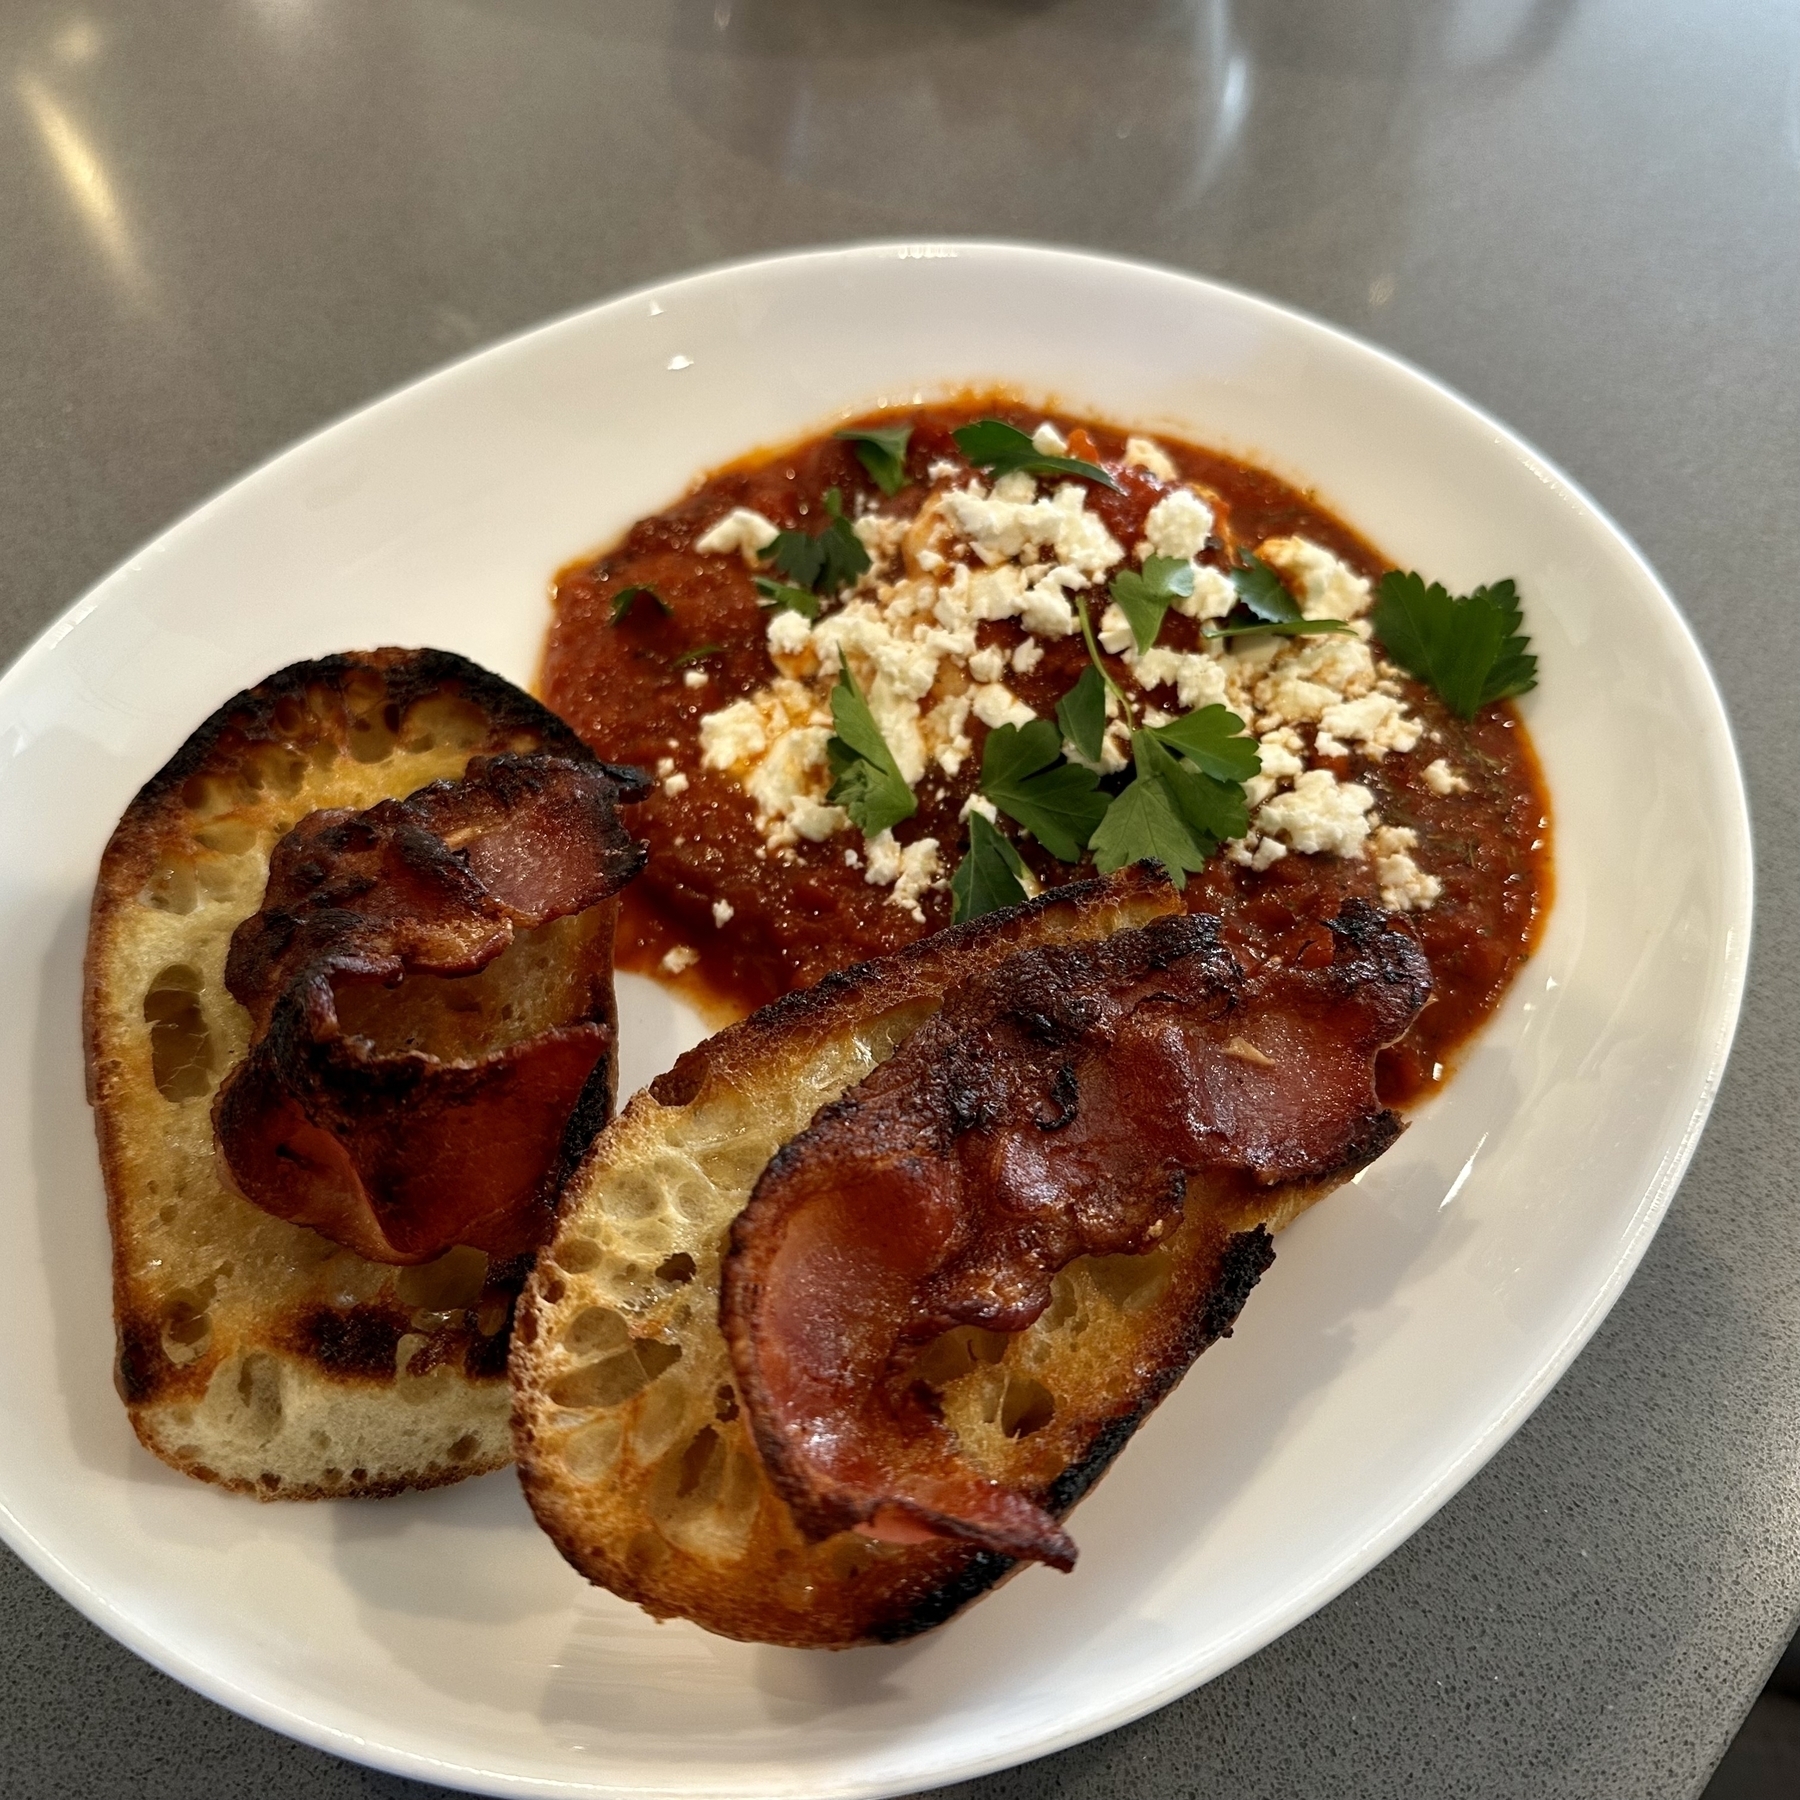 A toasted baguette with two strips of bacon adjacent to a pool of crushed, cooked tomatoes with a poached egg, feta, and fresh parsley.